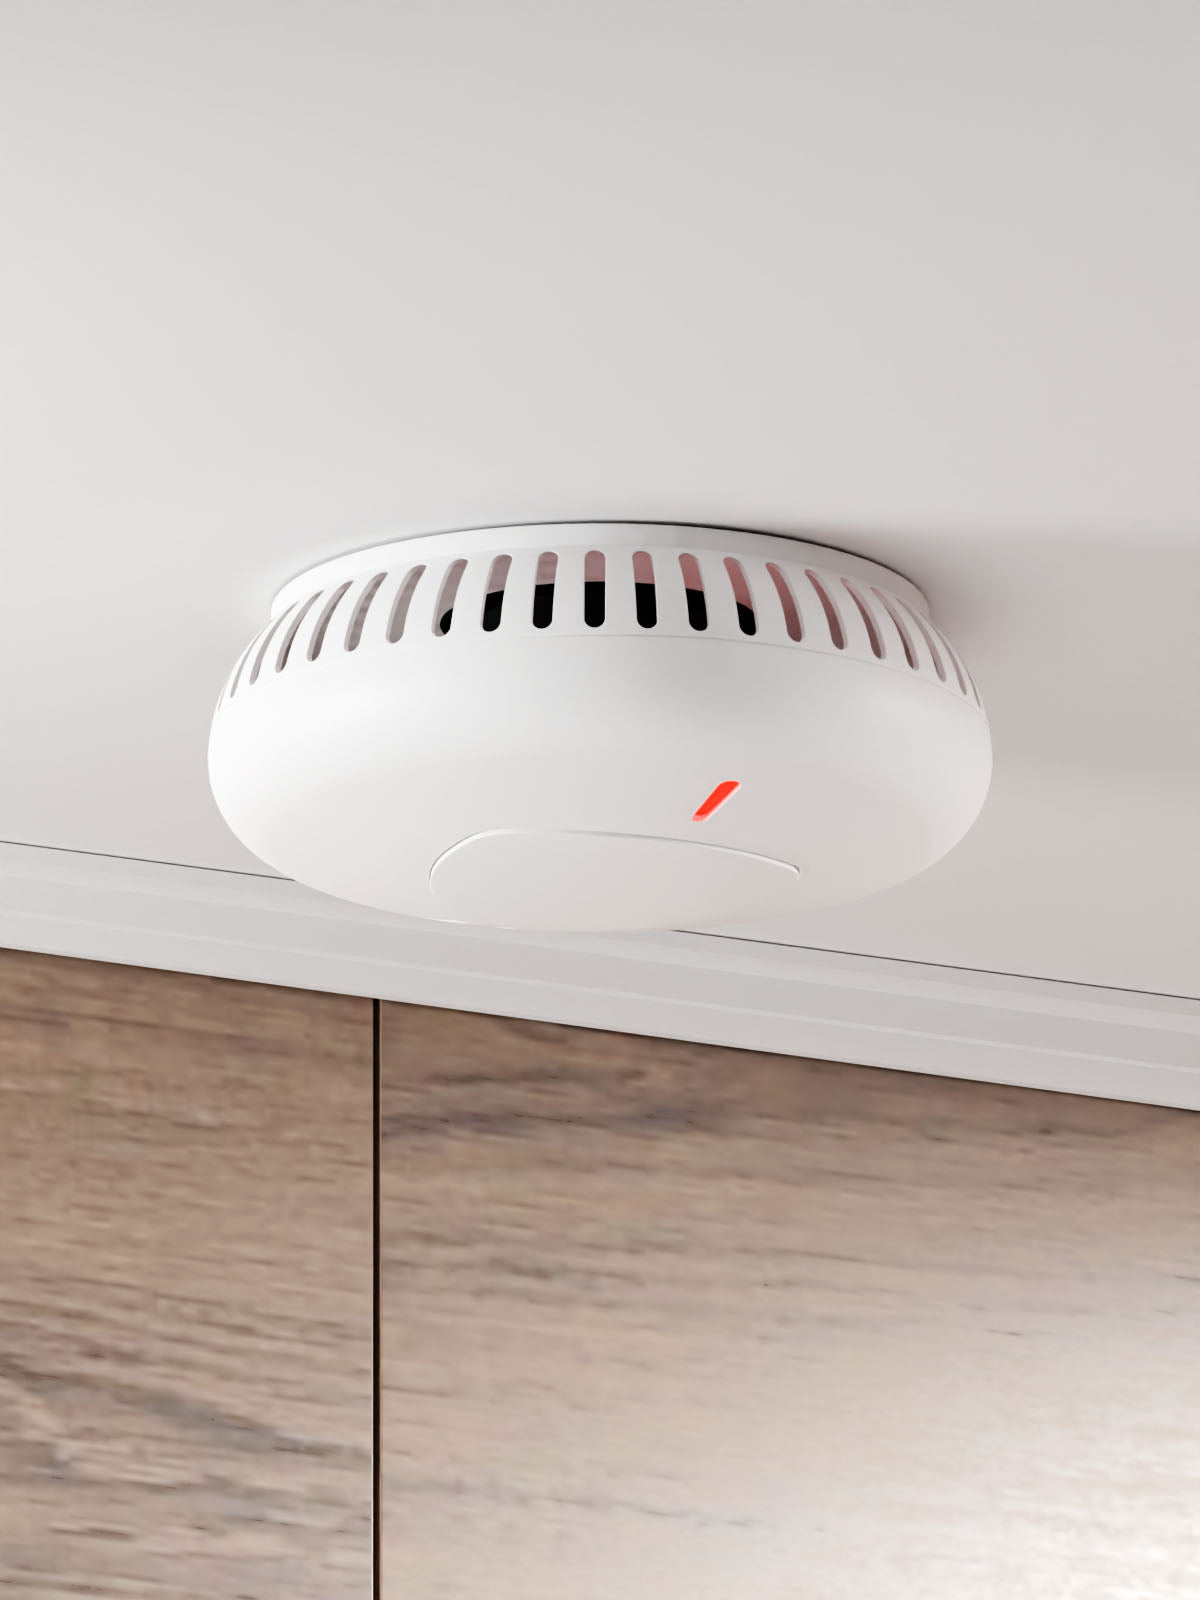 Staniot SK030, Smart Photoelectric Smoke Alarm positioned on ceiling with wooden drawers appearing near the back